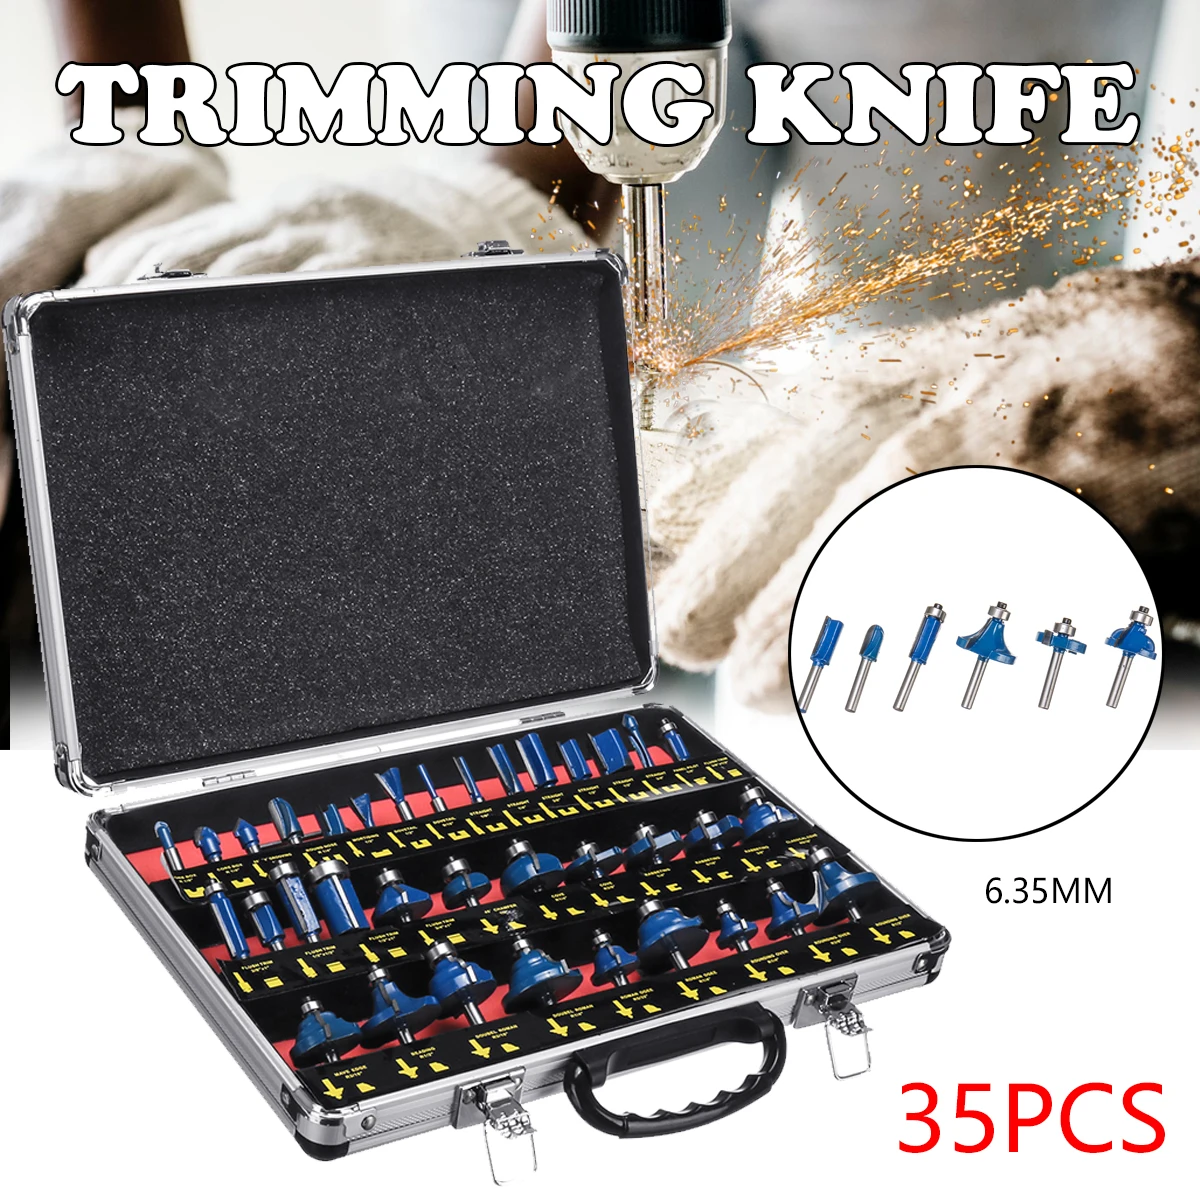 

35Pcs 6.35mm Shank Tungsten Carbide Router Bit Tools Wood Woodworking Cutter Trimming Knife Forming Milling Carving Cutting Set